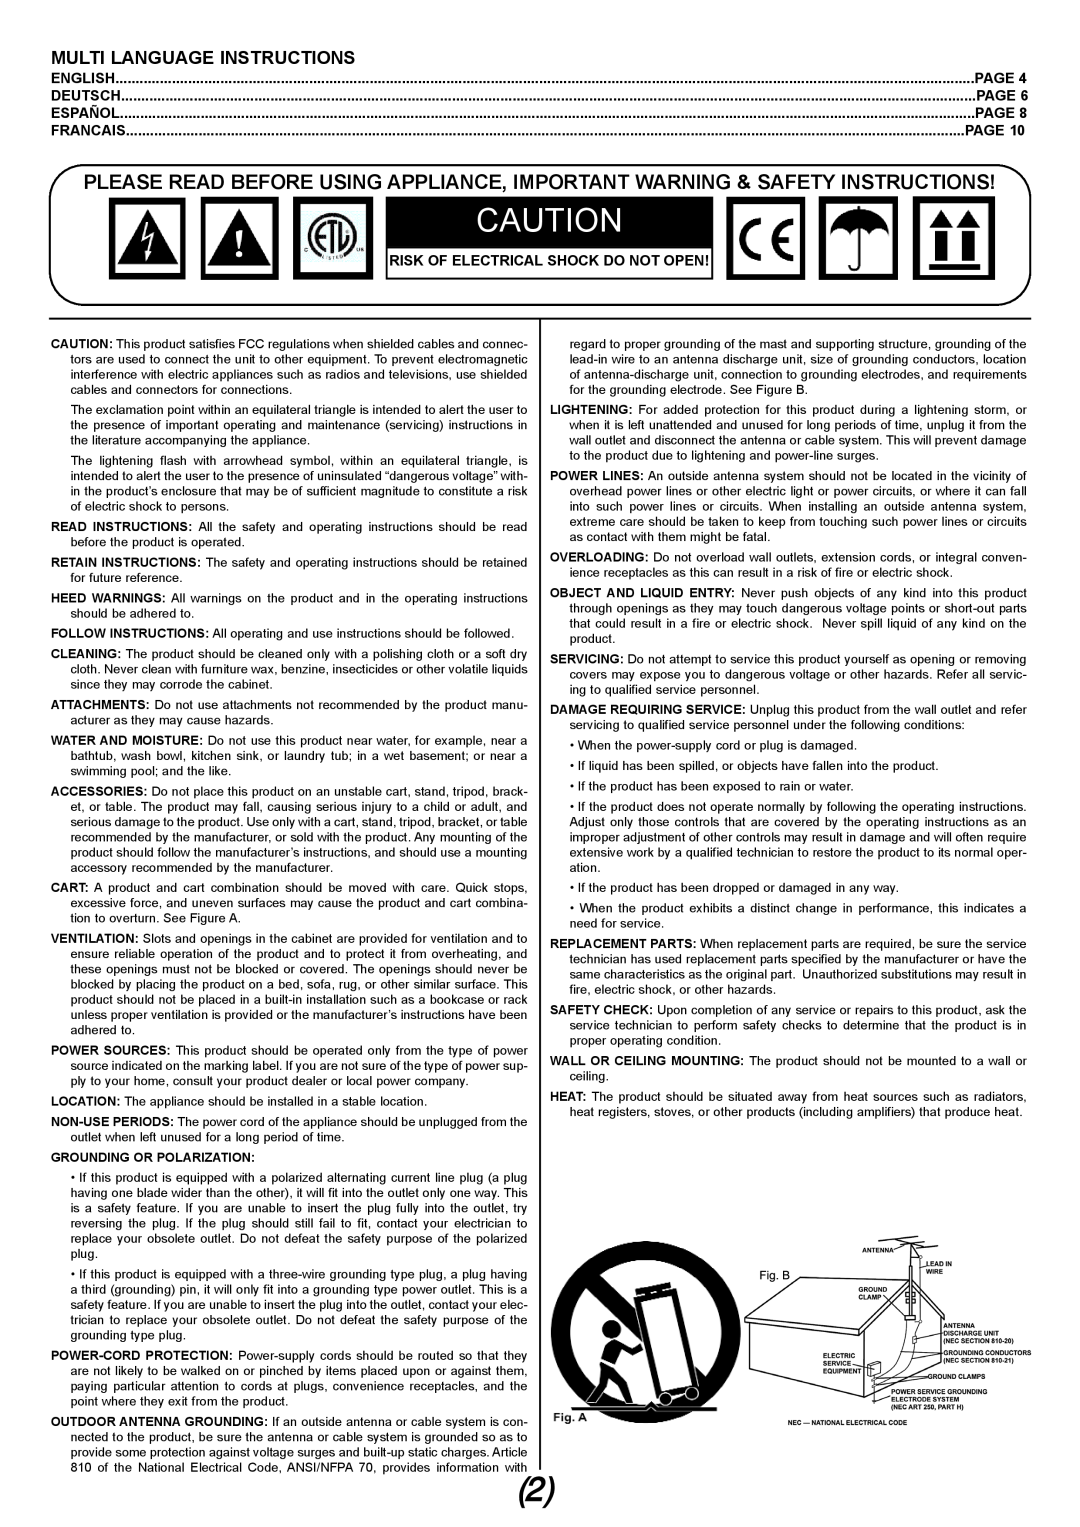 Gemini TT-04 Multi Language Instructions, Page, Risk Of Electrical Shock Do Not Open, Francais, Grounding Or Polarization 